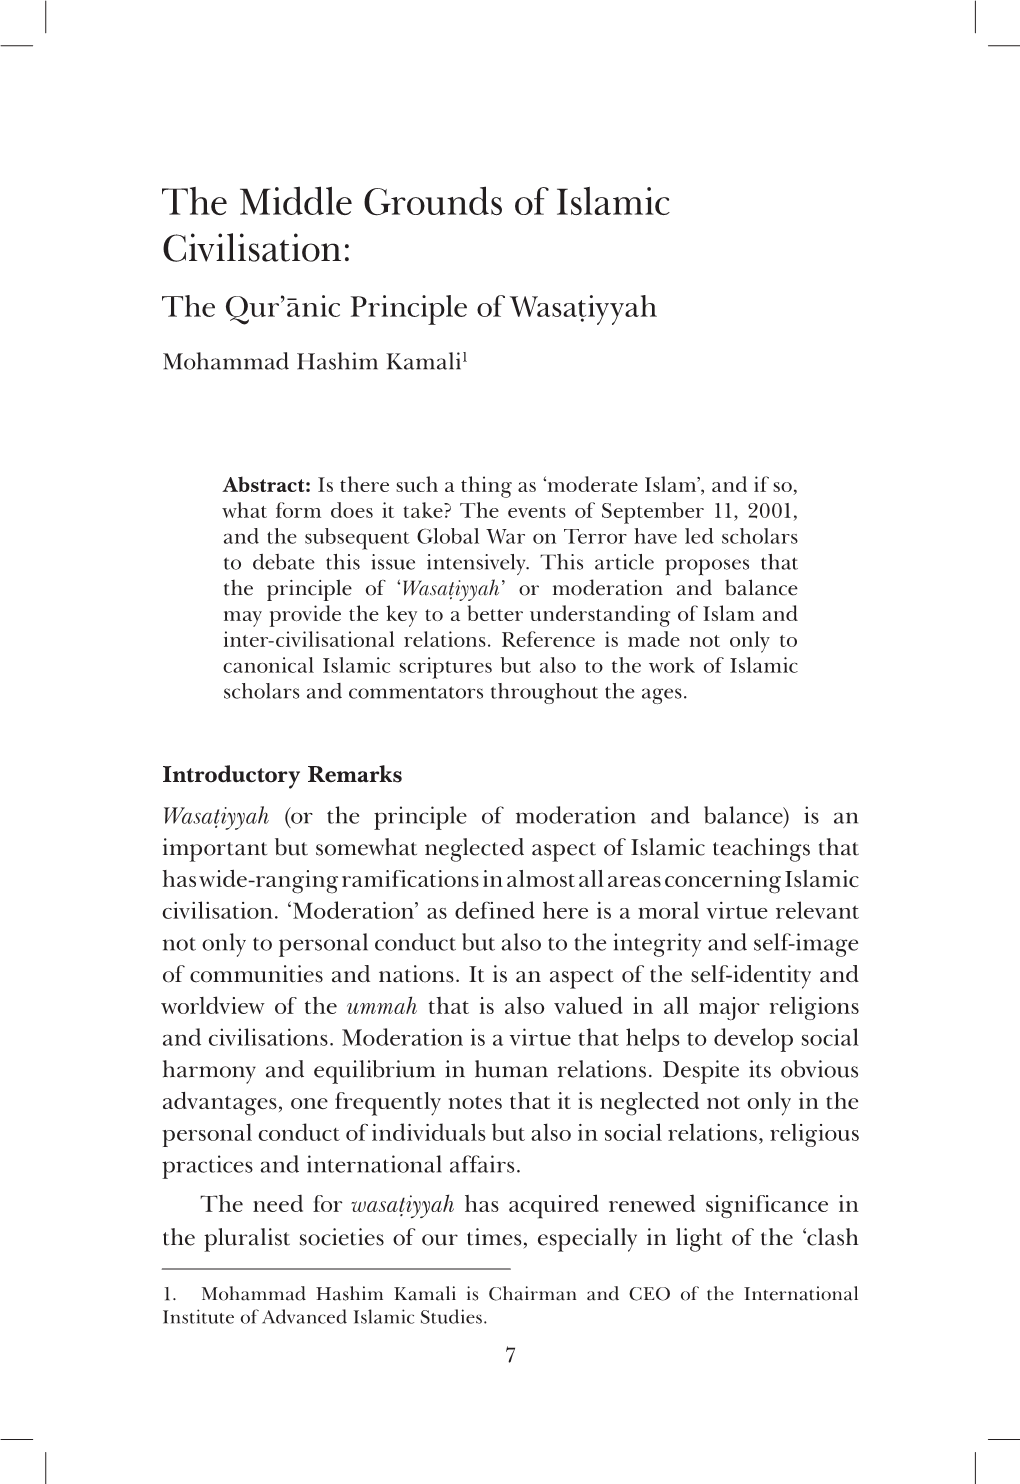 The Middle Grounds of Islamic Civilisation: the Qur’Ānic Principle of Wasaṭiyyah